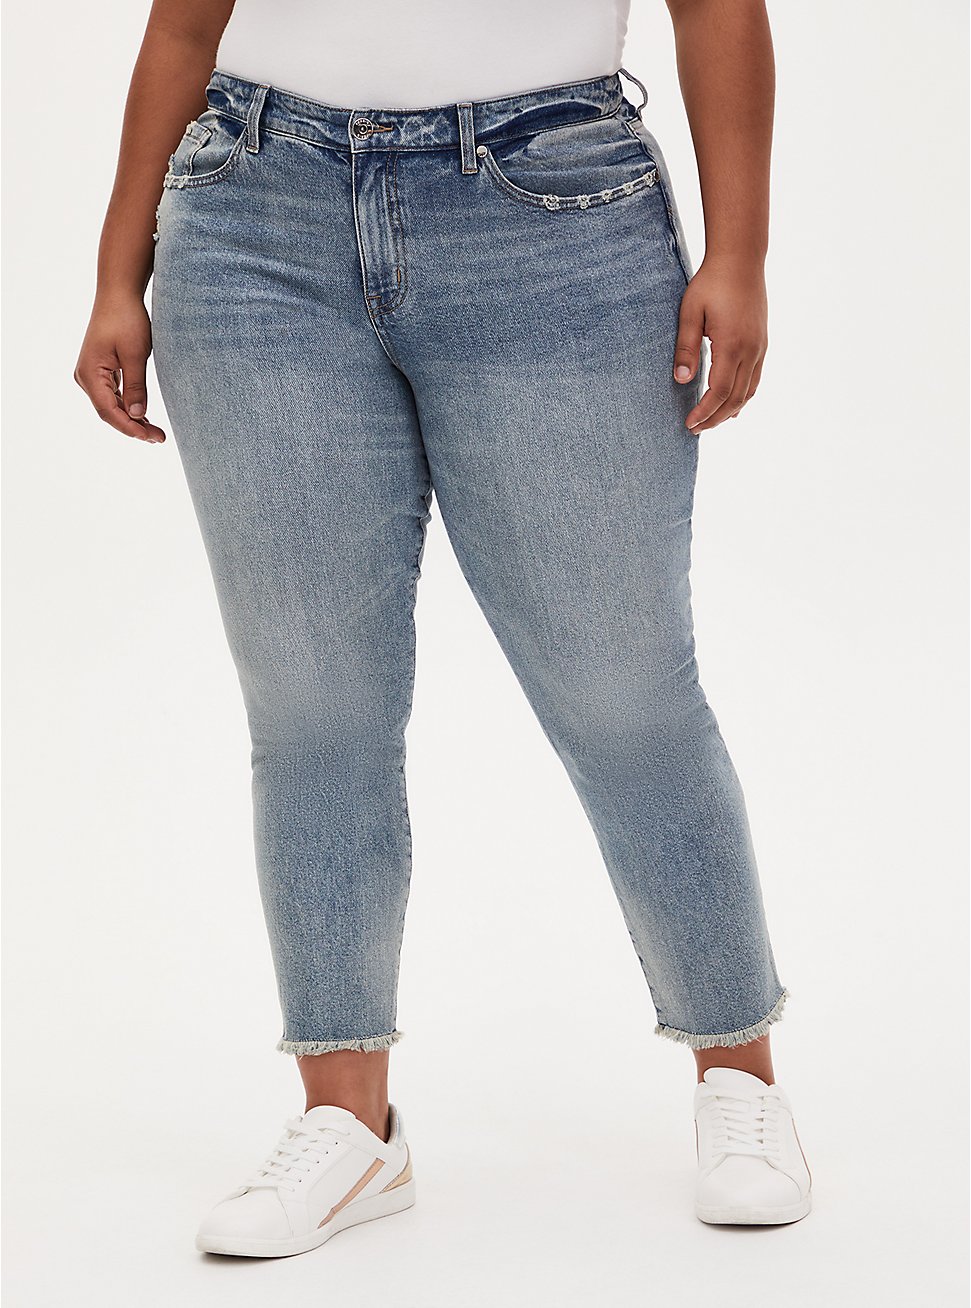 Plus Size High Rise Straight Jean - Light Wash with Fray Hem, MOONSHINE, hi-res